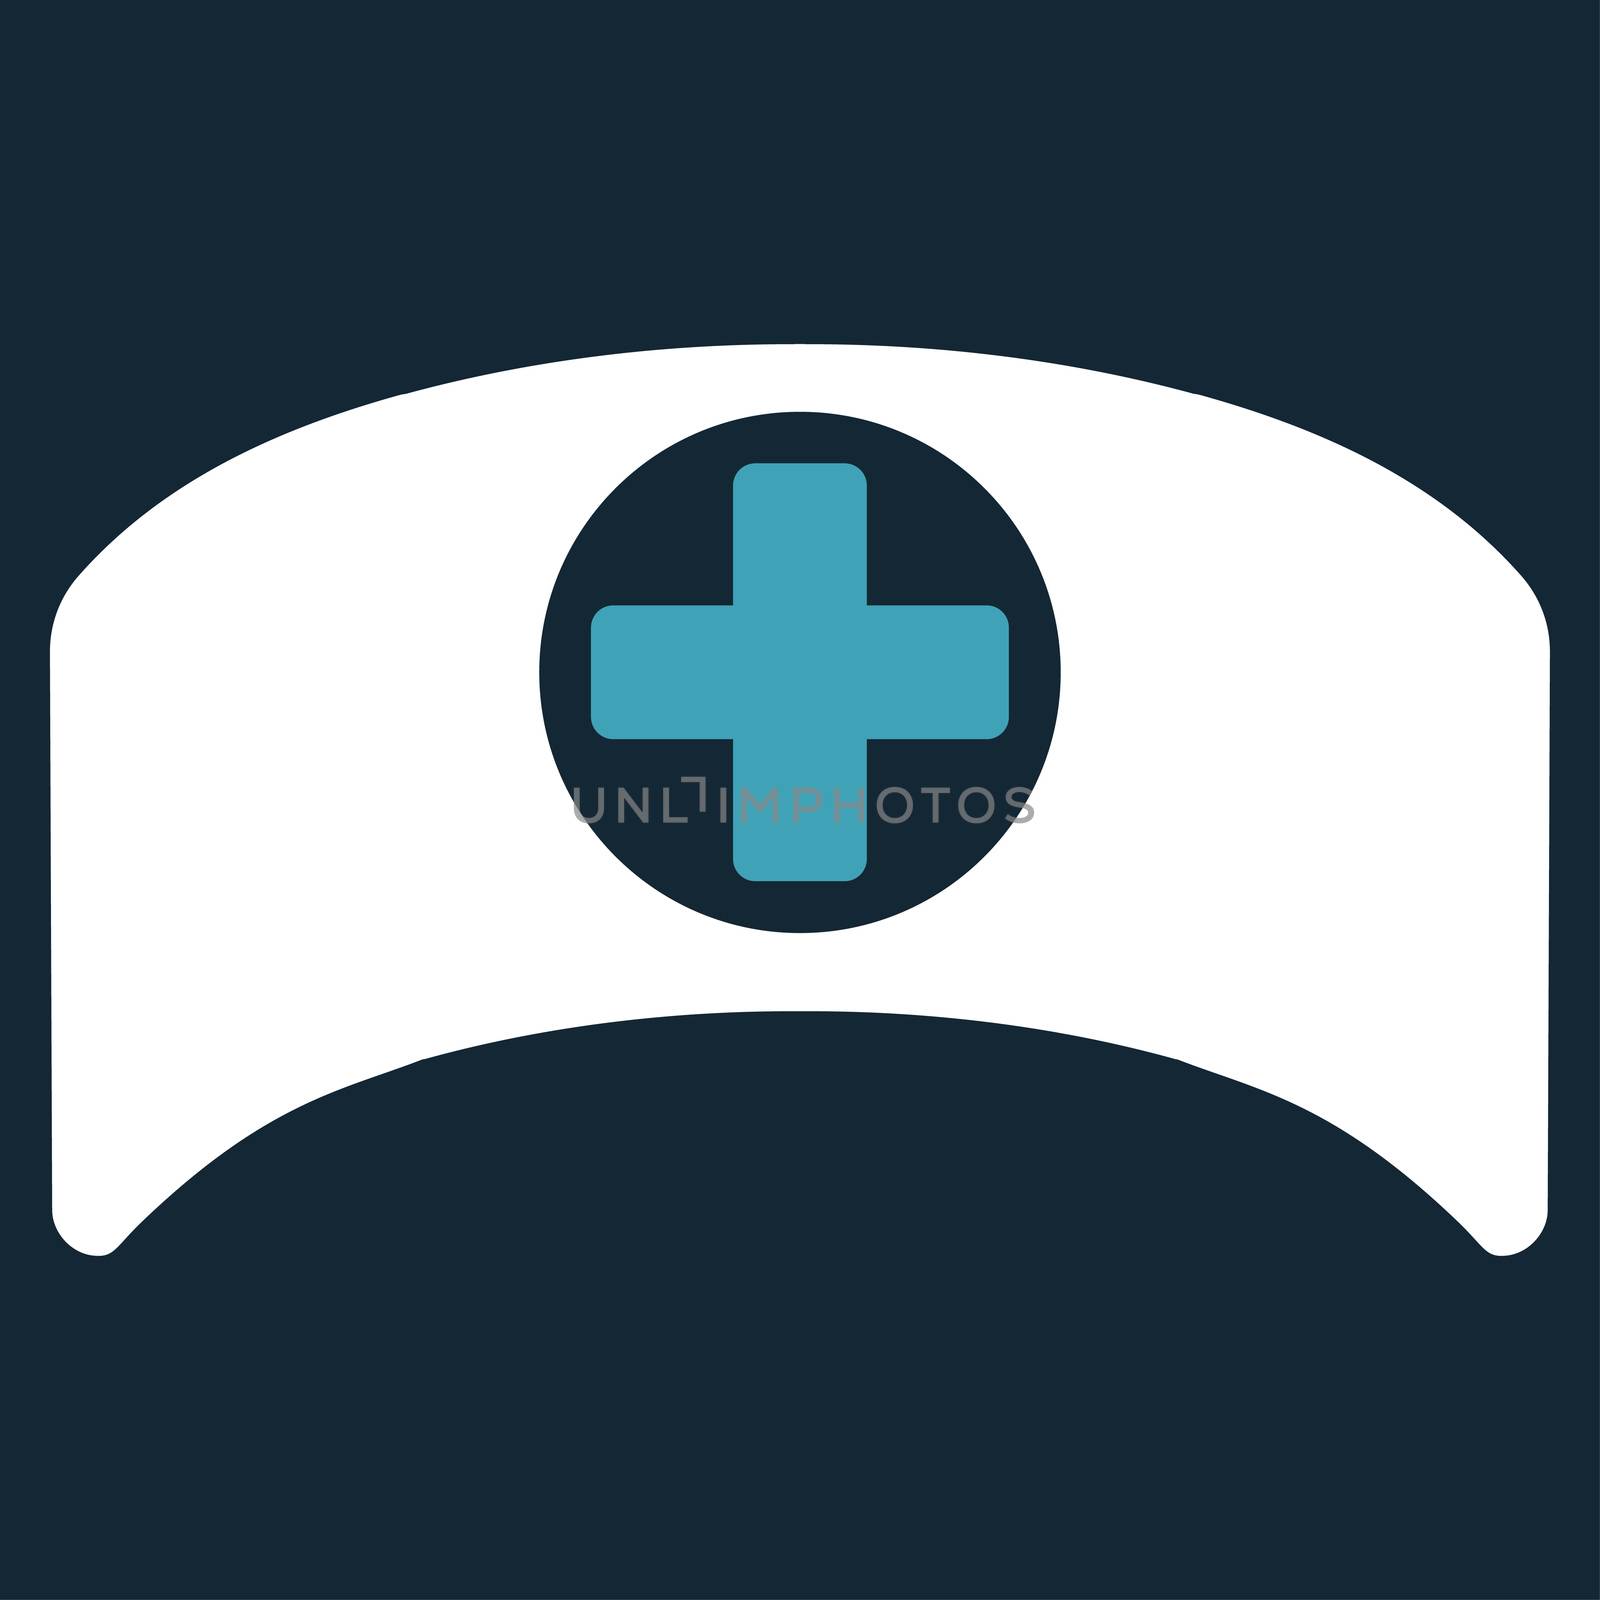 Doctor Cap raster icon. Style is bicolor flat symbol, blue and white colors, rounded angles, dark blue background.